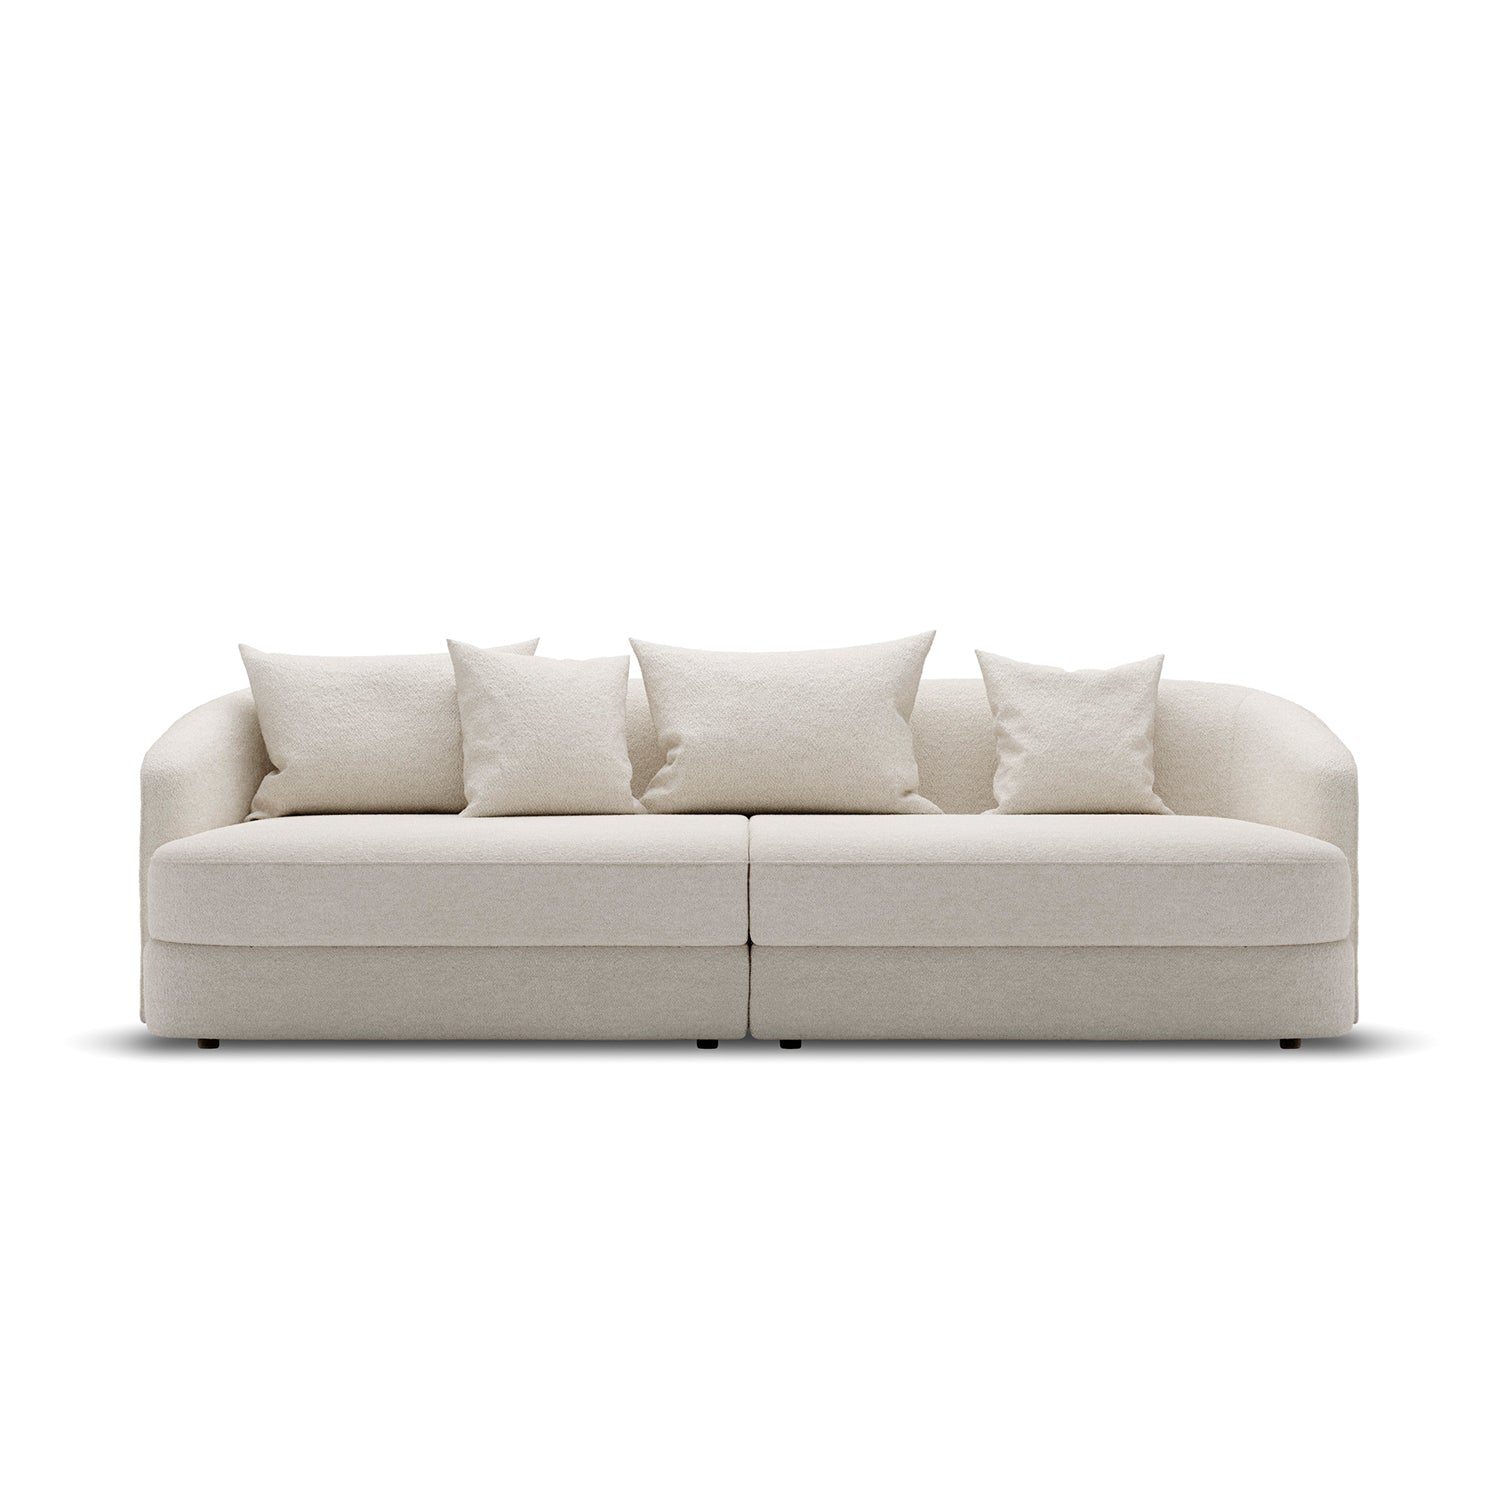 New Works Covent Residential Sofa in lana beige 